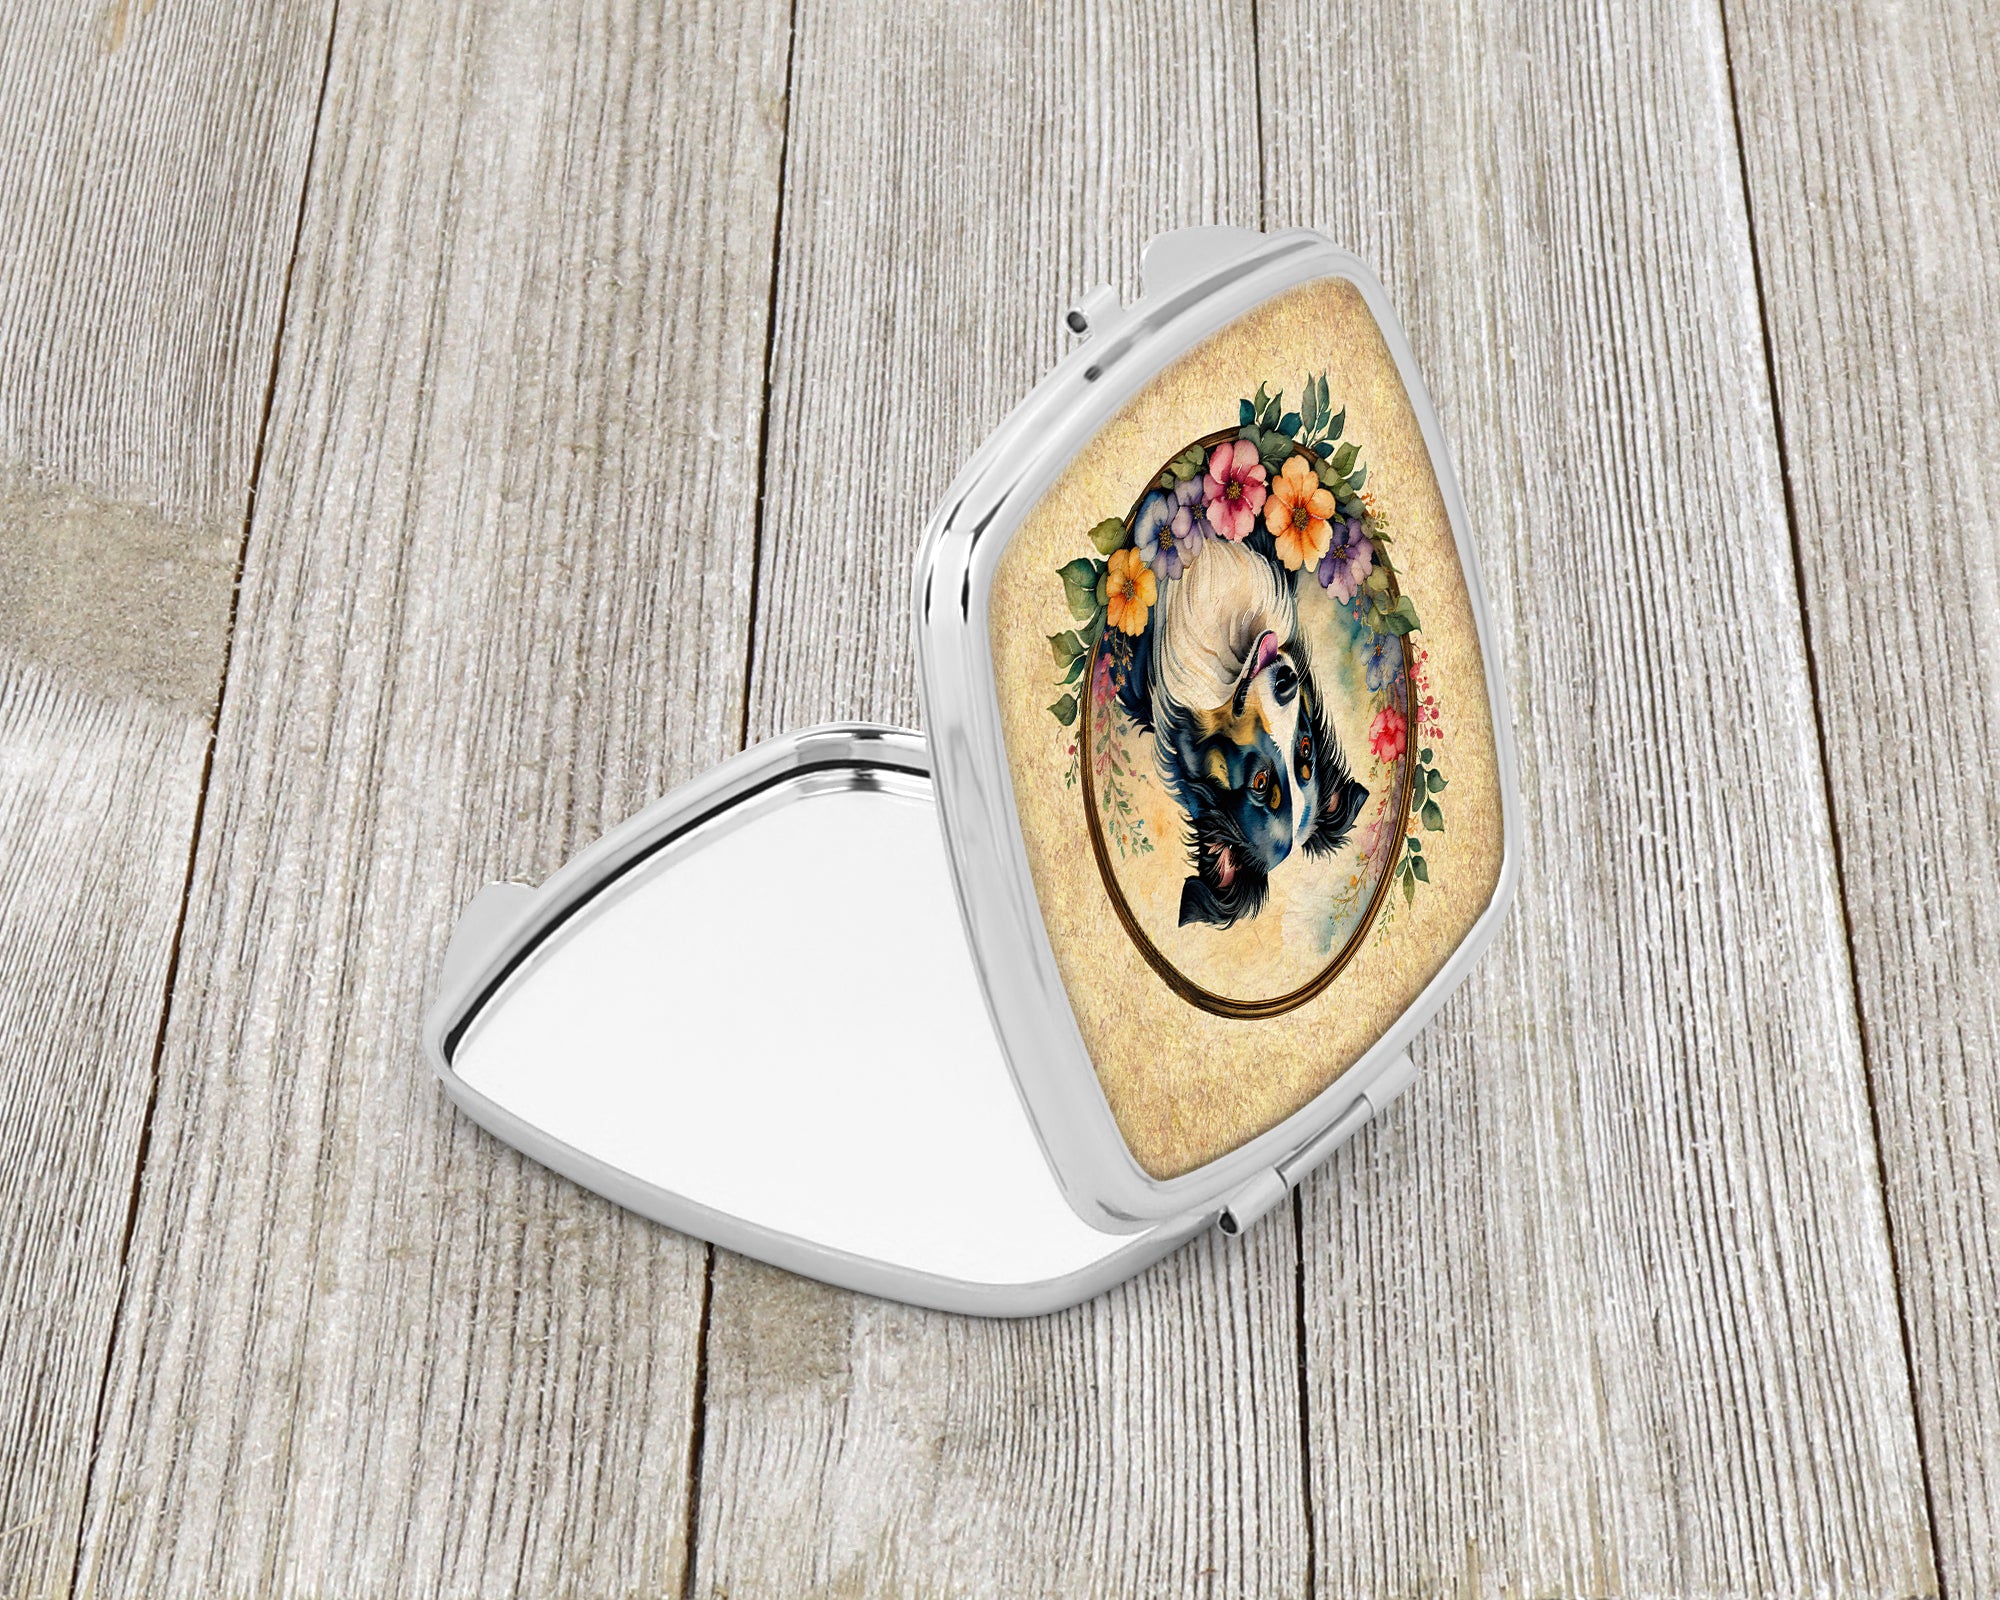 Buy this Border Collie and Flowers Compact Mirror